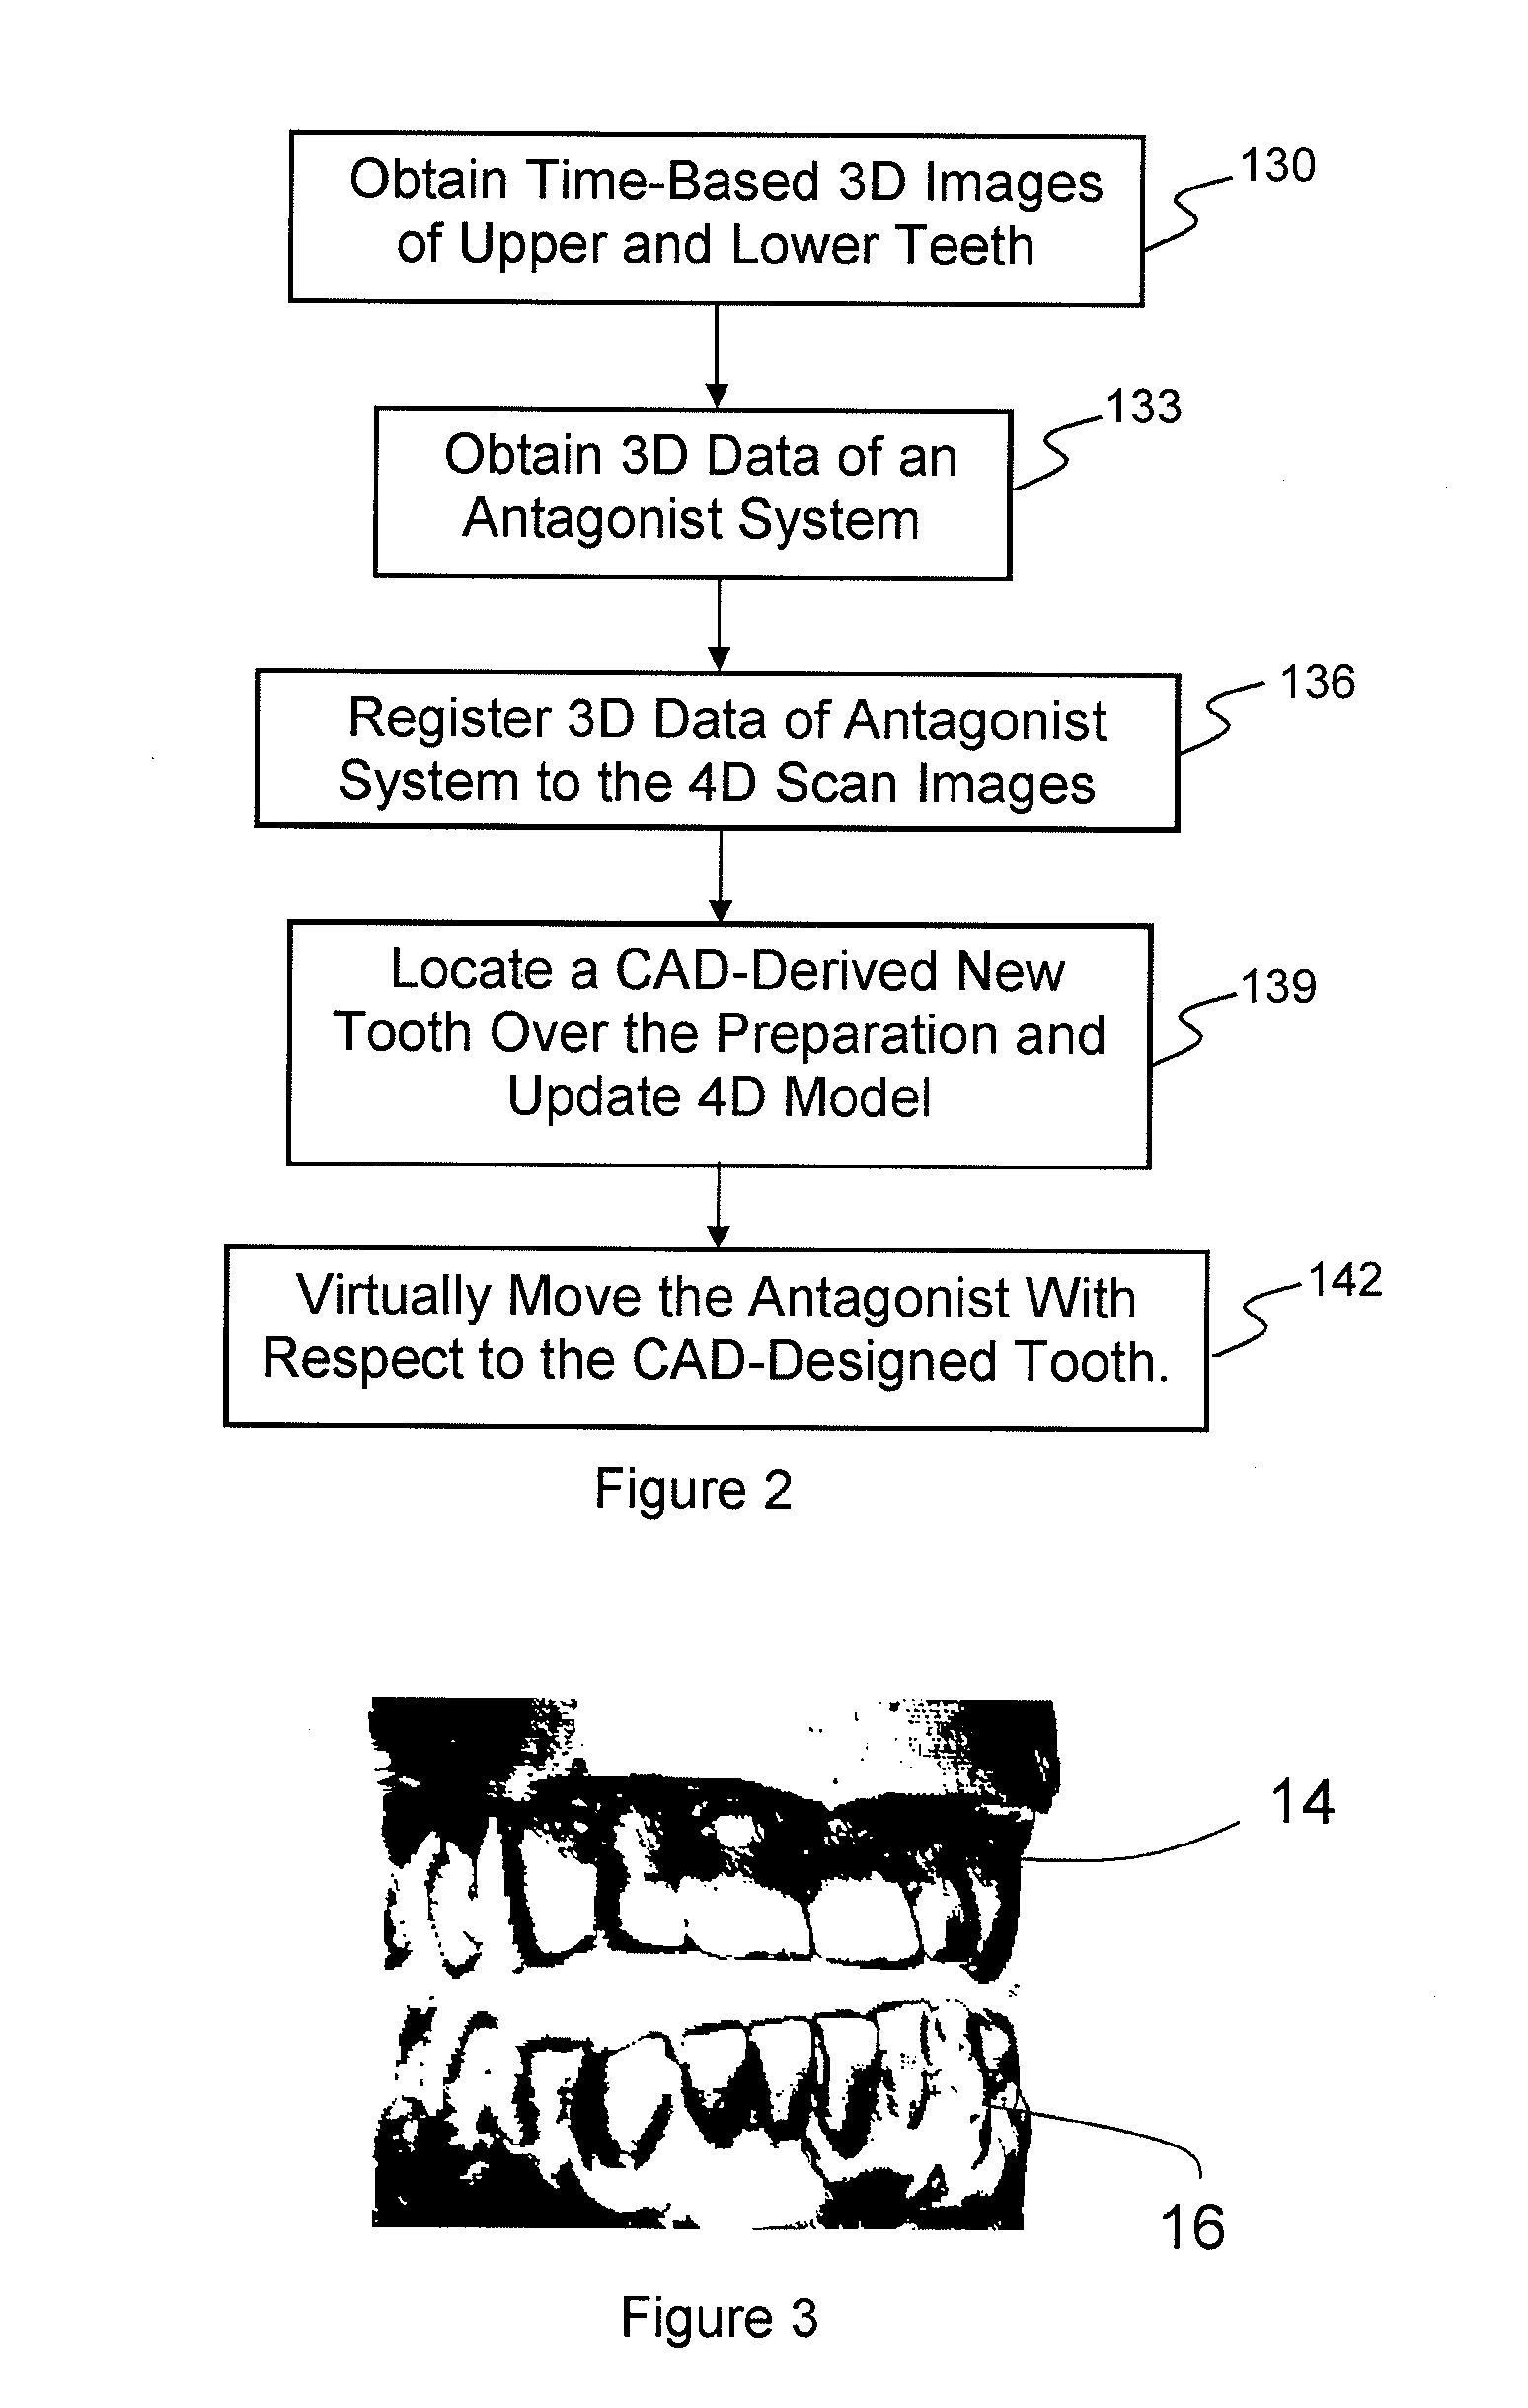 Method Of Designing Dental Devices Using Four-Dimensional Data